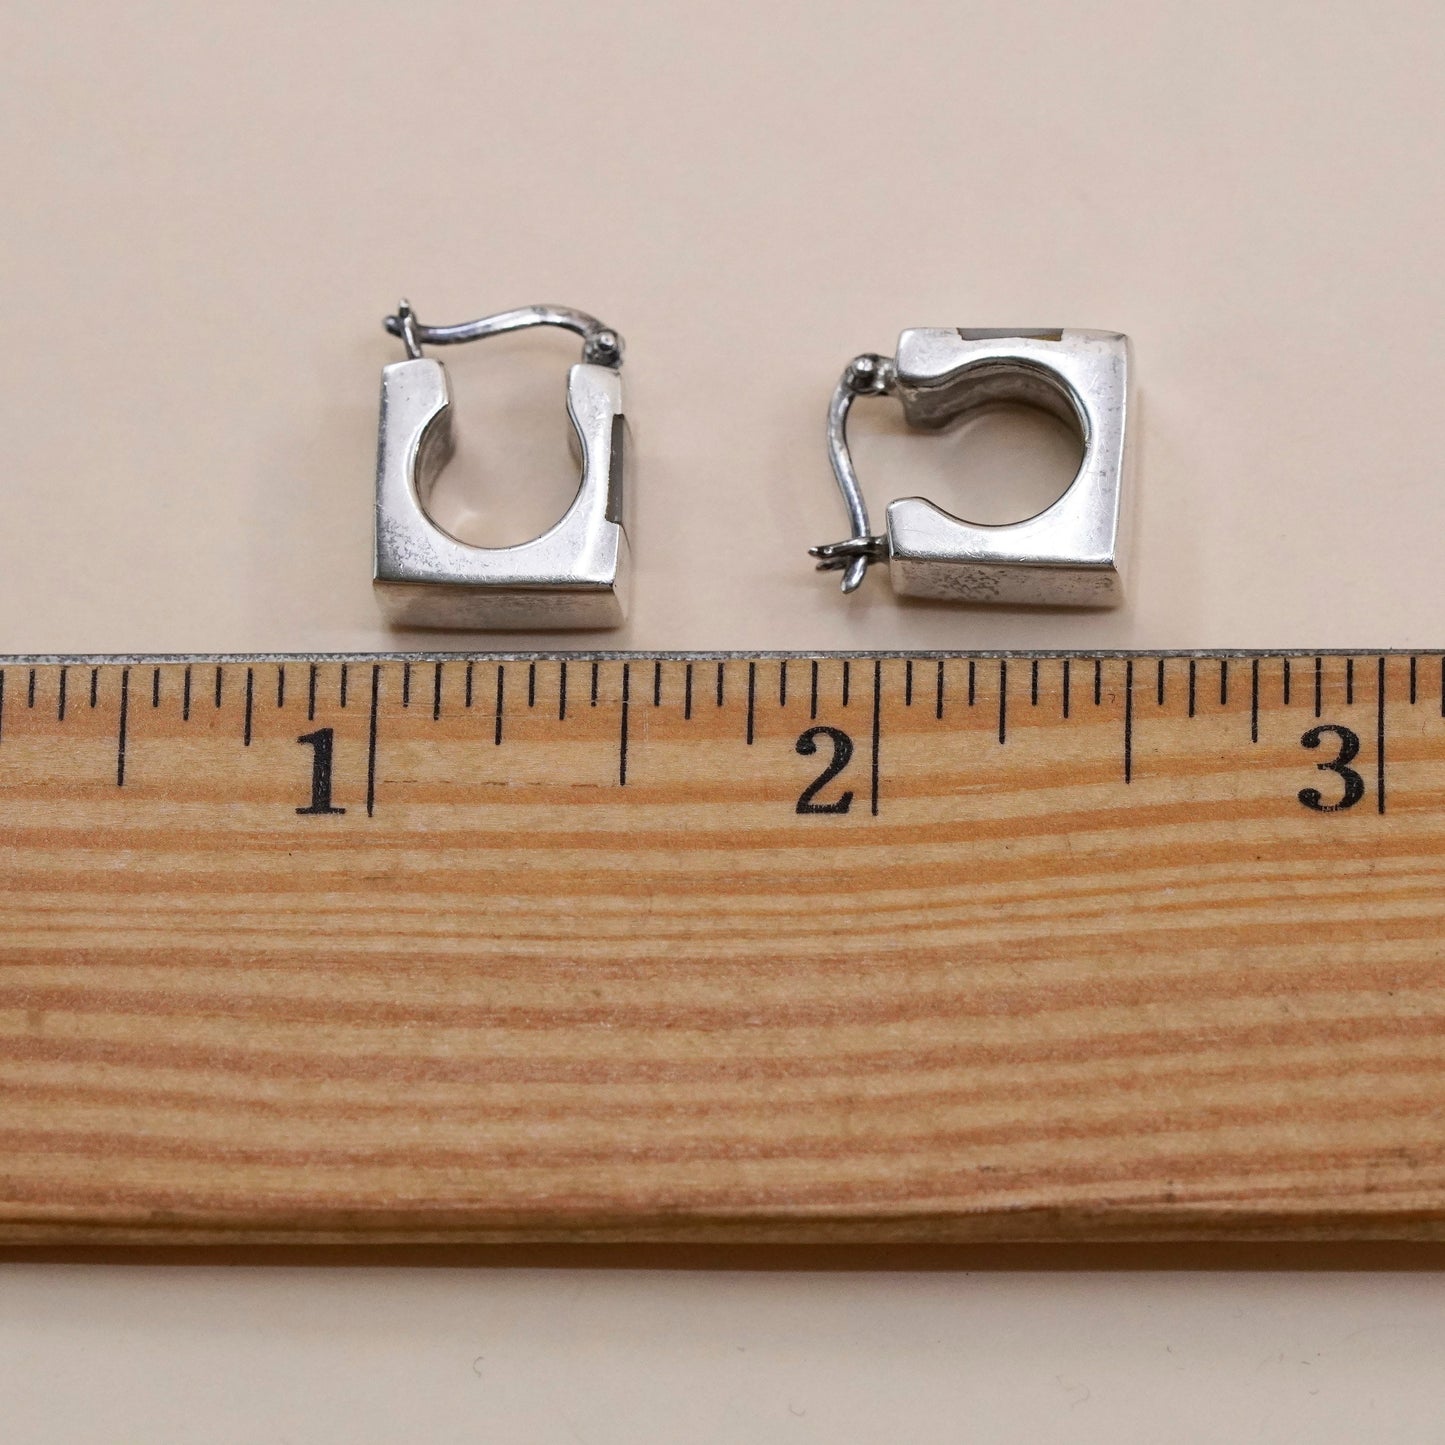 0.5”, sterling silver earrings, square 925 hoops, Huggie with mother of pearl